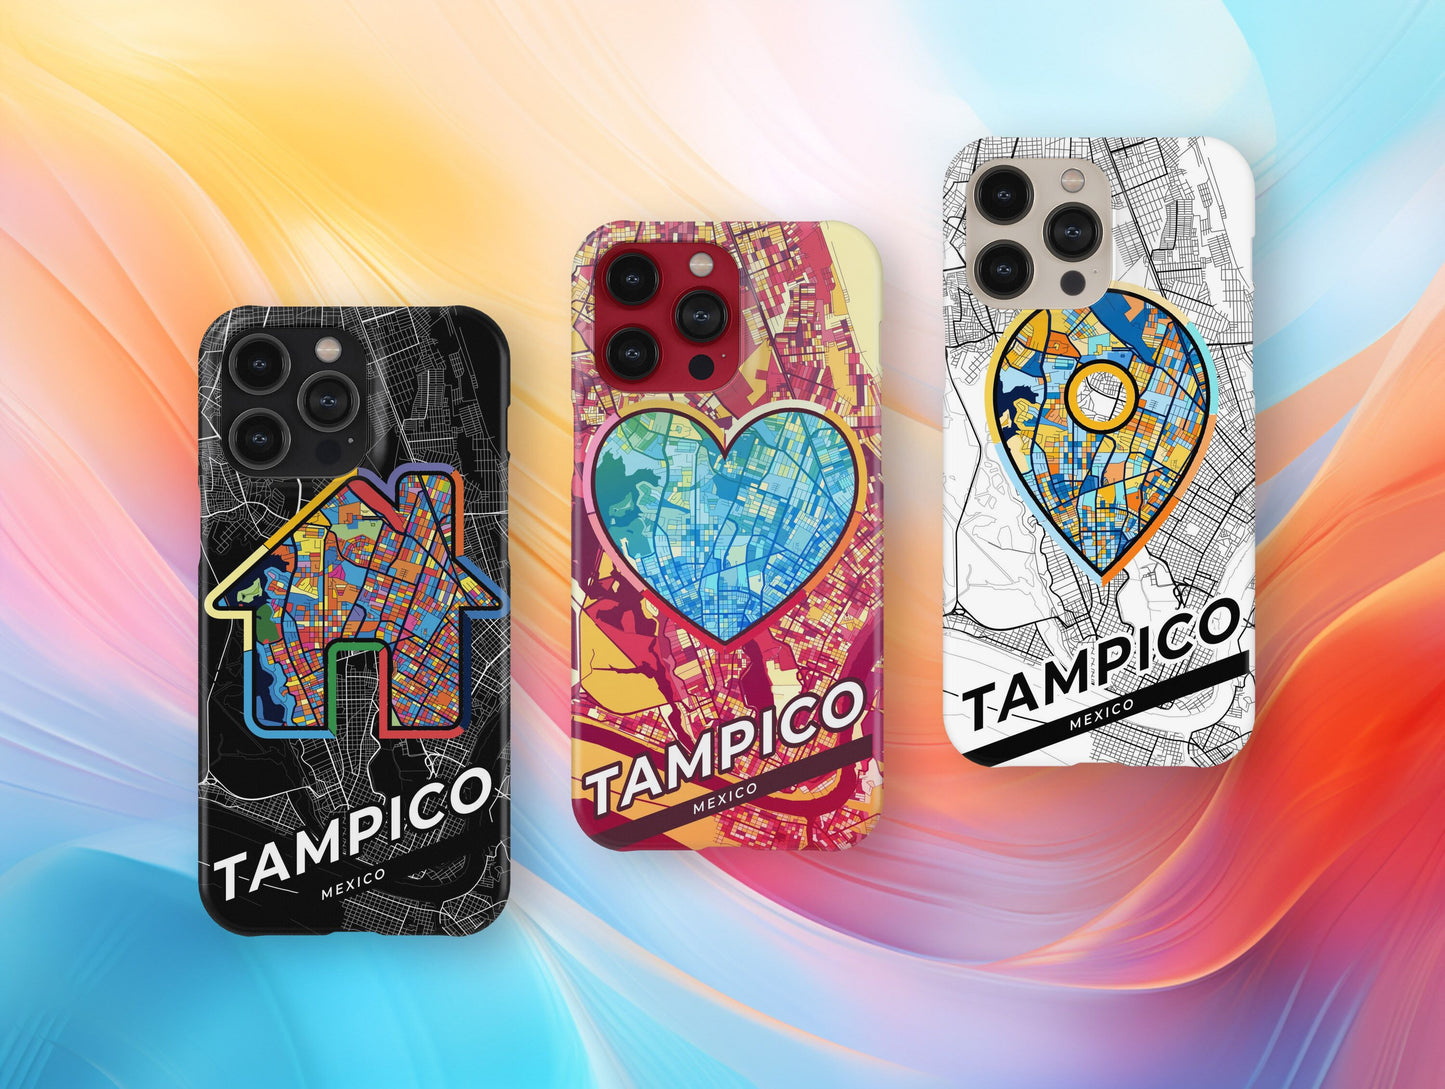 Tampico Mexico slim phone case with colorful icon